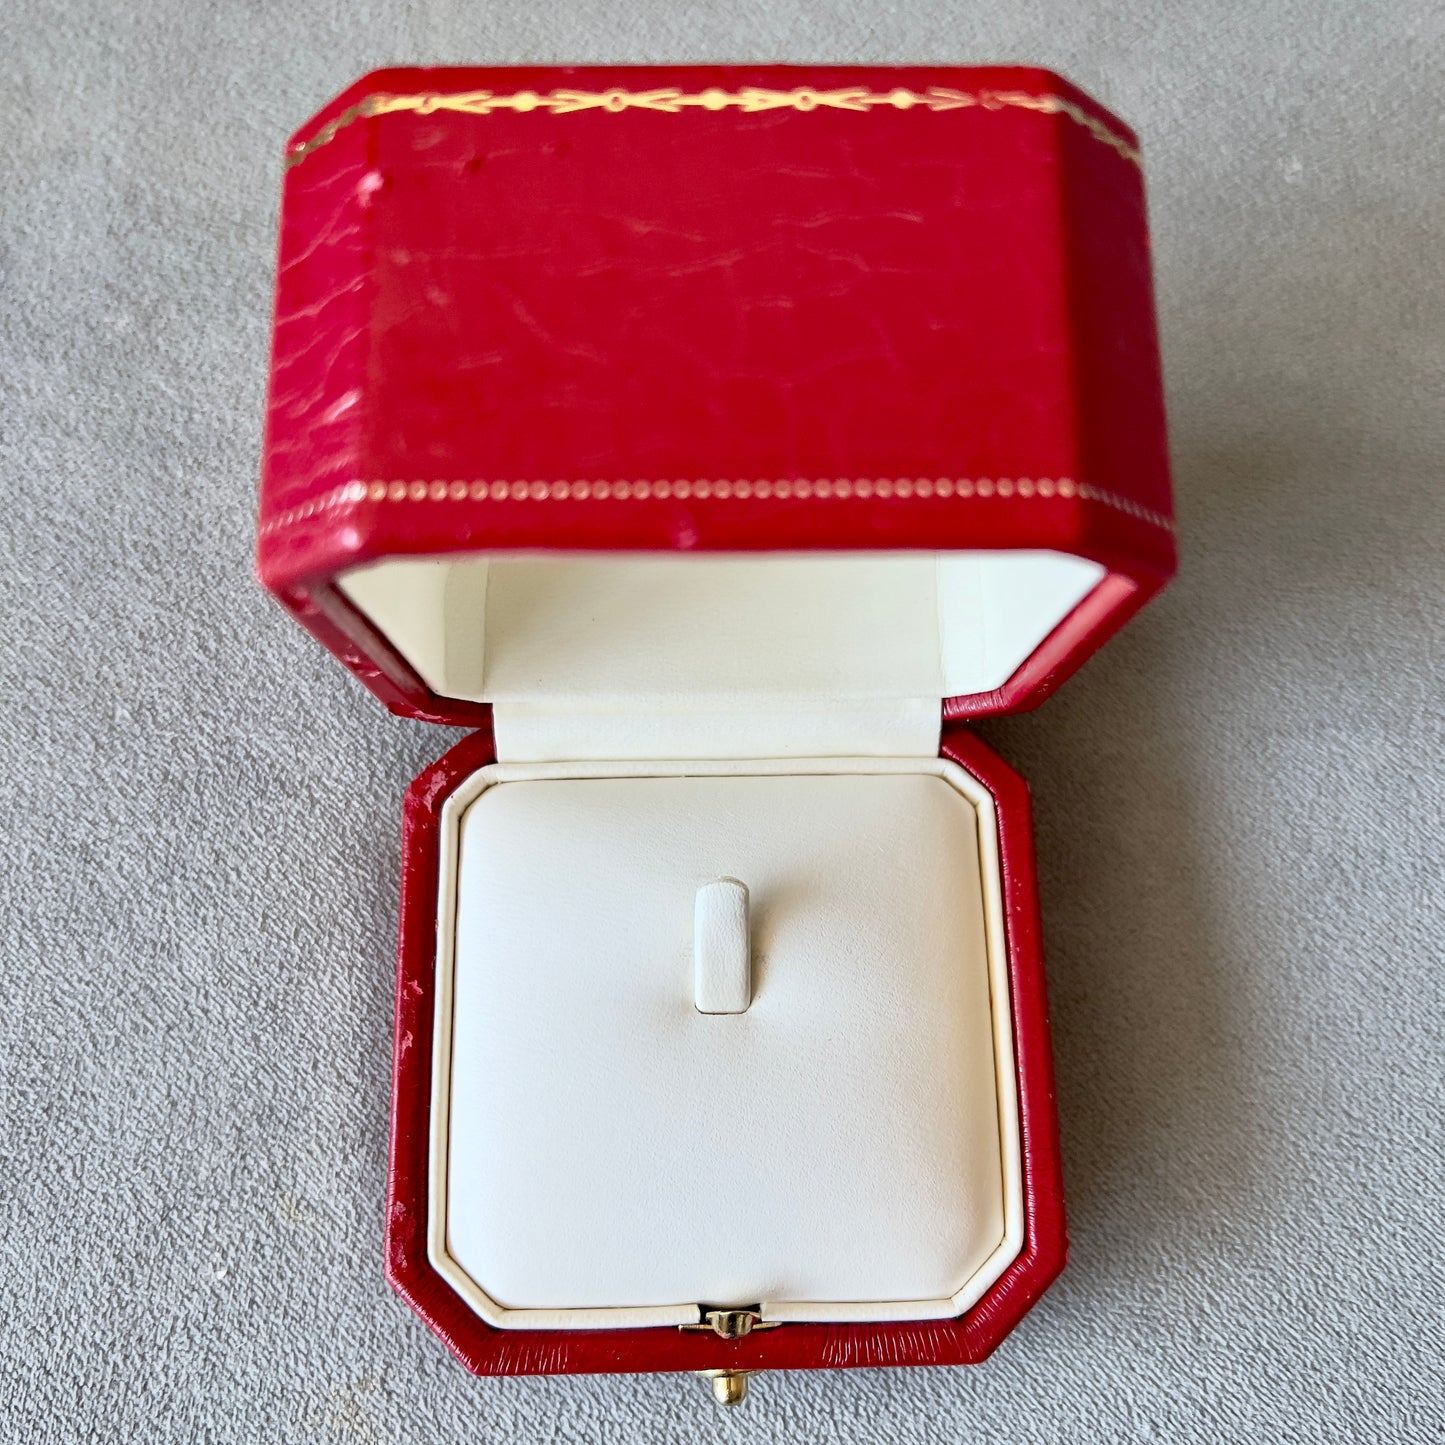 CARTIER Ring Pendant Box 2.60x2.60x2 inches